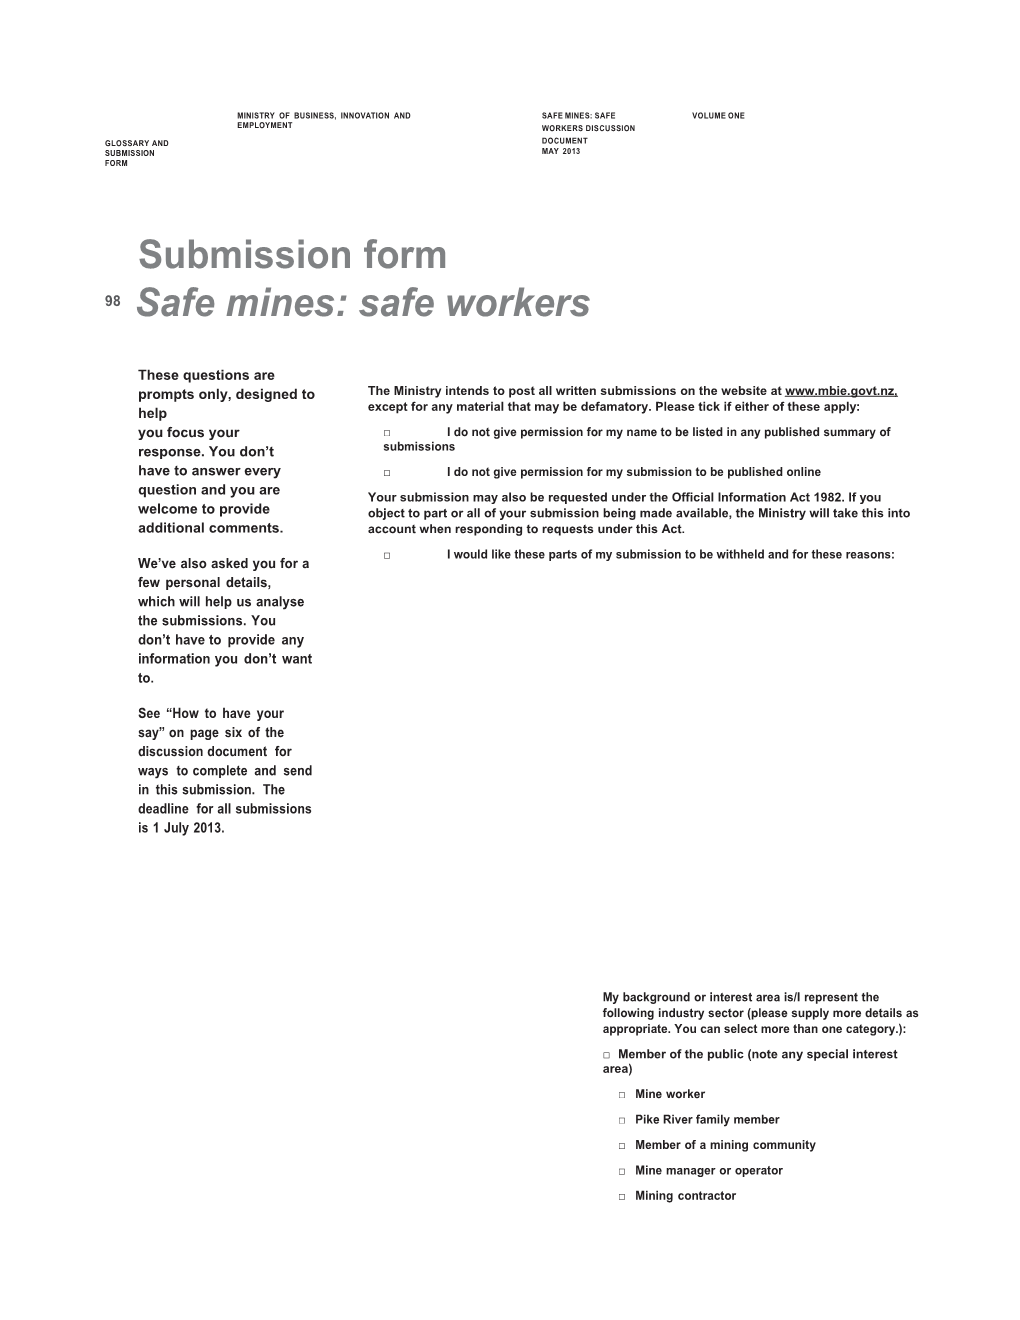 Safe Mines: Safe Workers - Submission Form